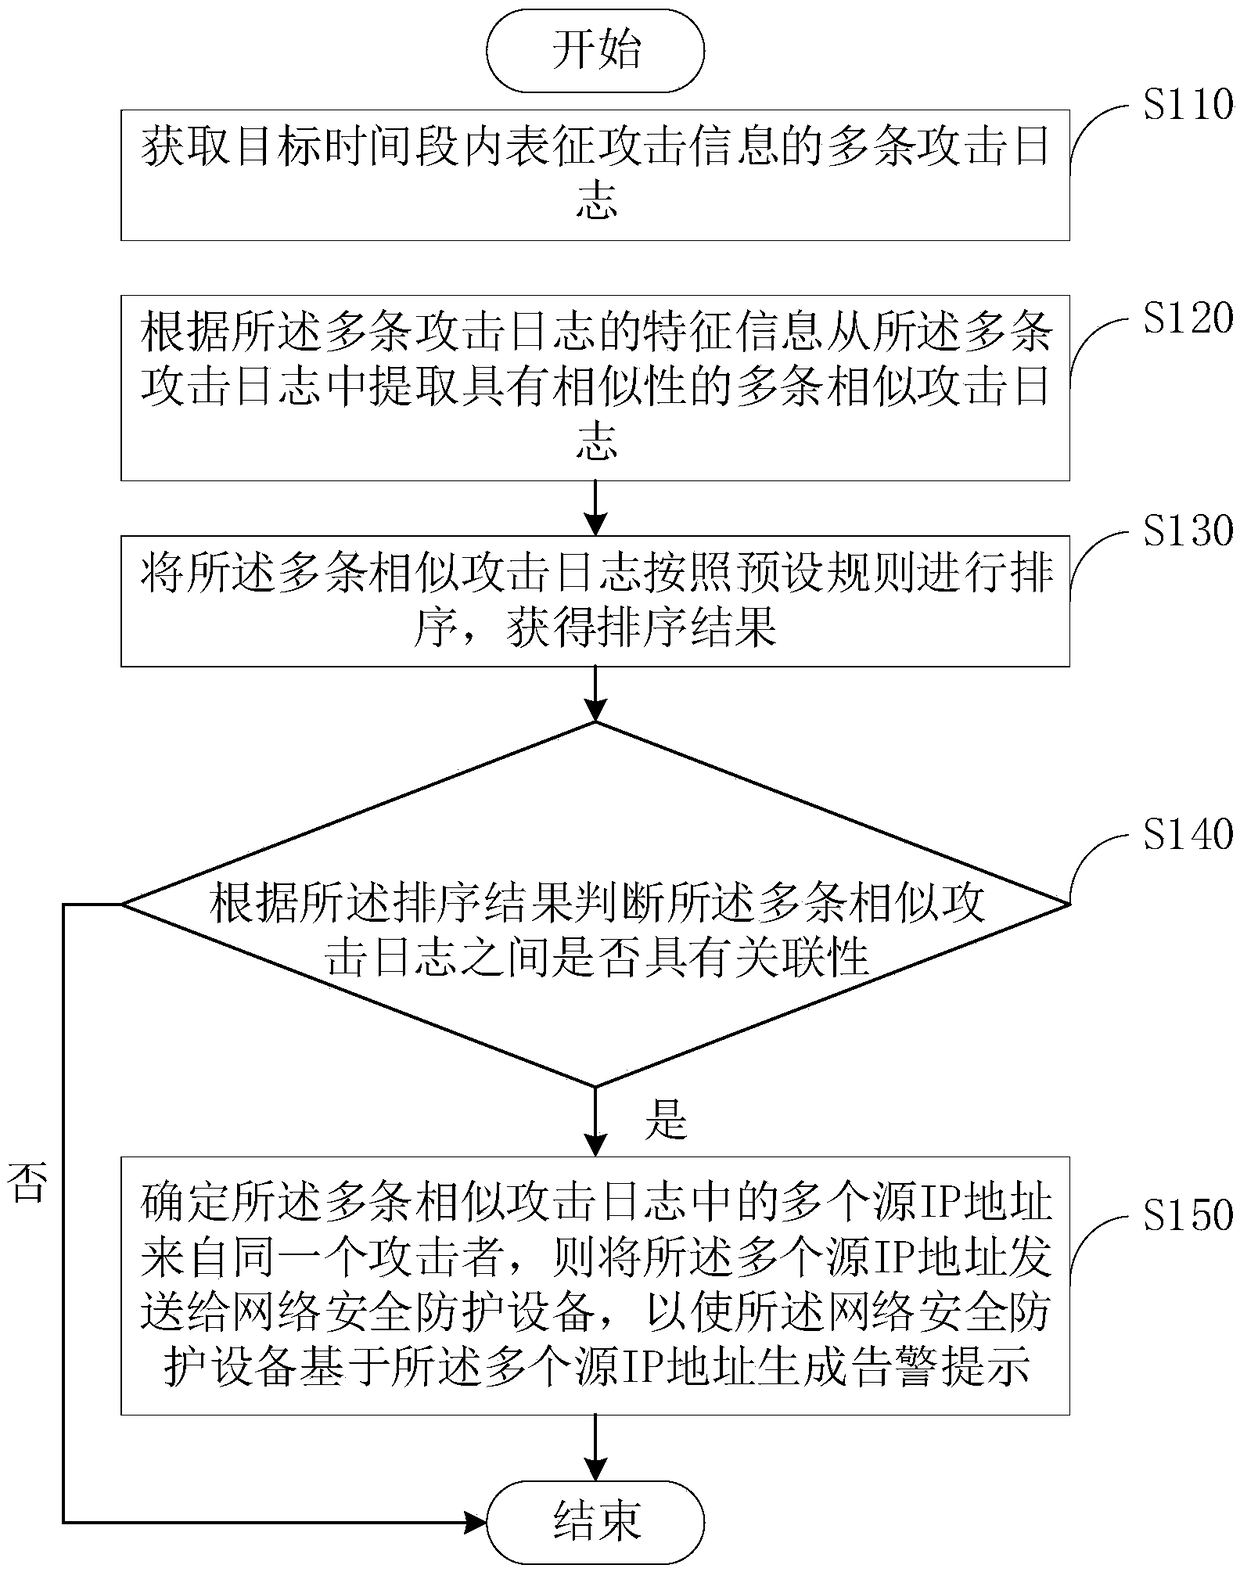 Attack information tracking and tracing method and device based on homologous analysis